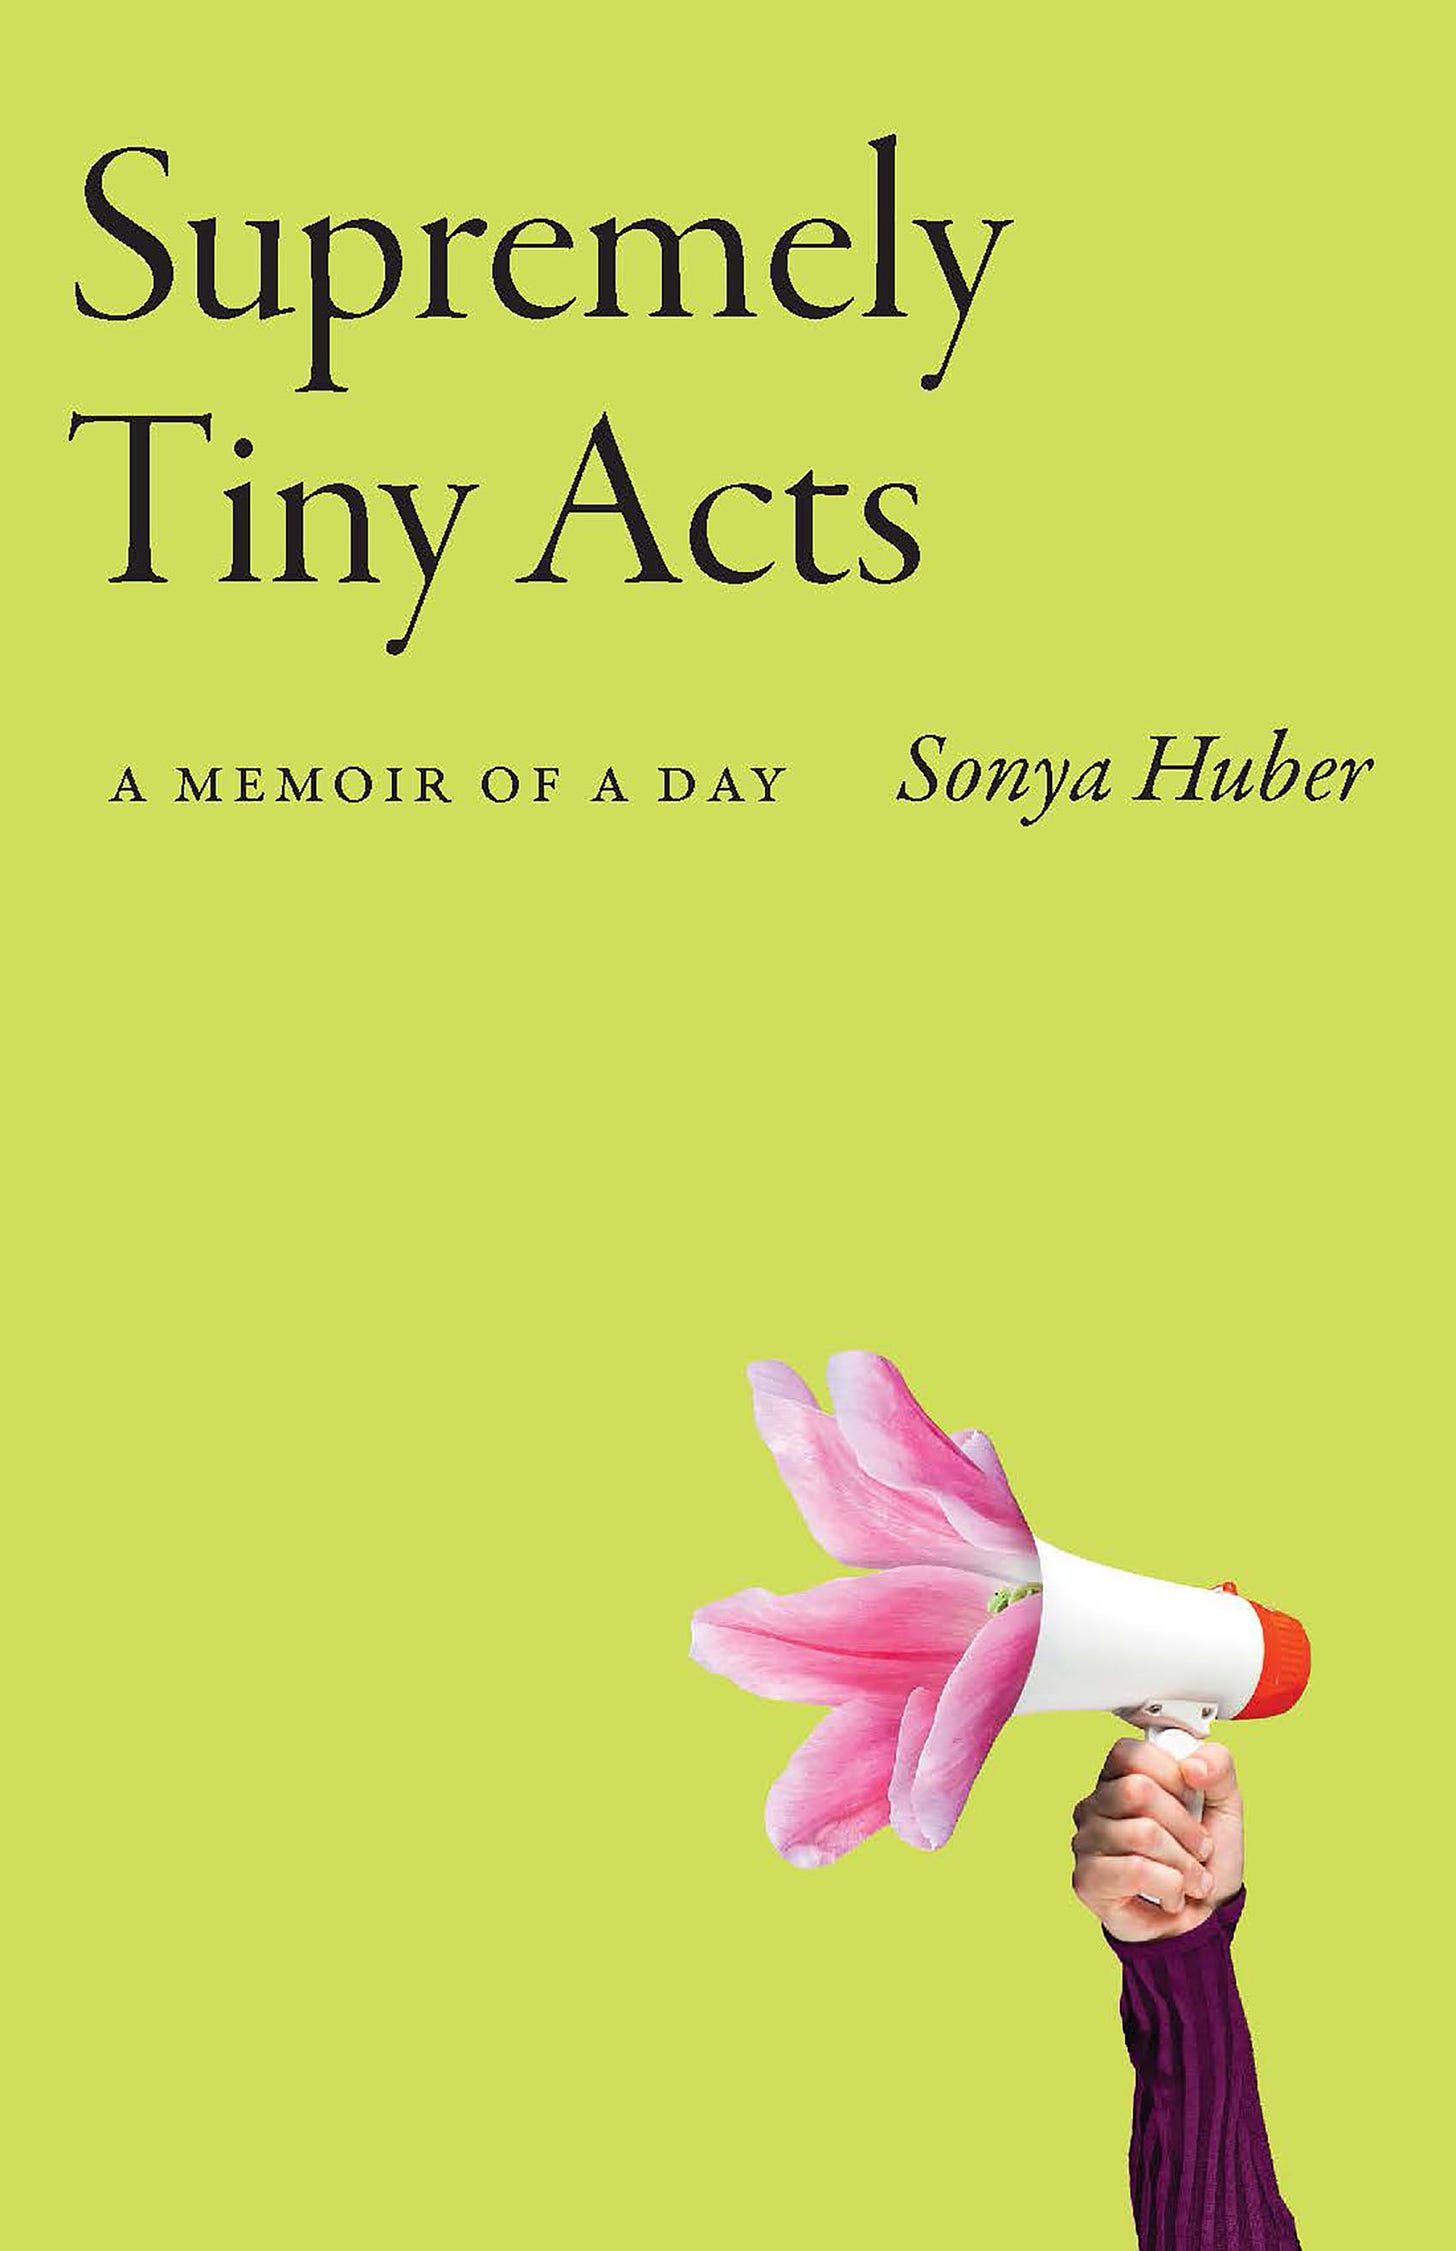 A bright, spring green book cover with the title and byline in black. In the bottom right is an image of a hand holding up a megaphone which has a large pink flower blooming from its horn. 